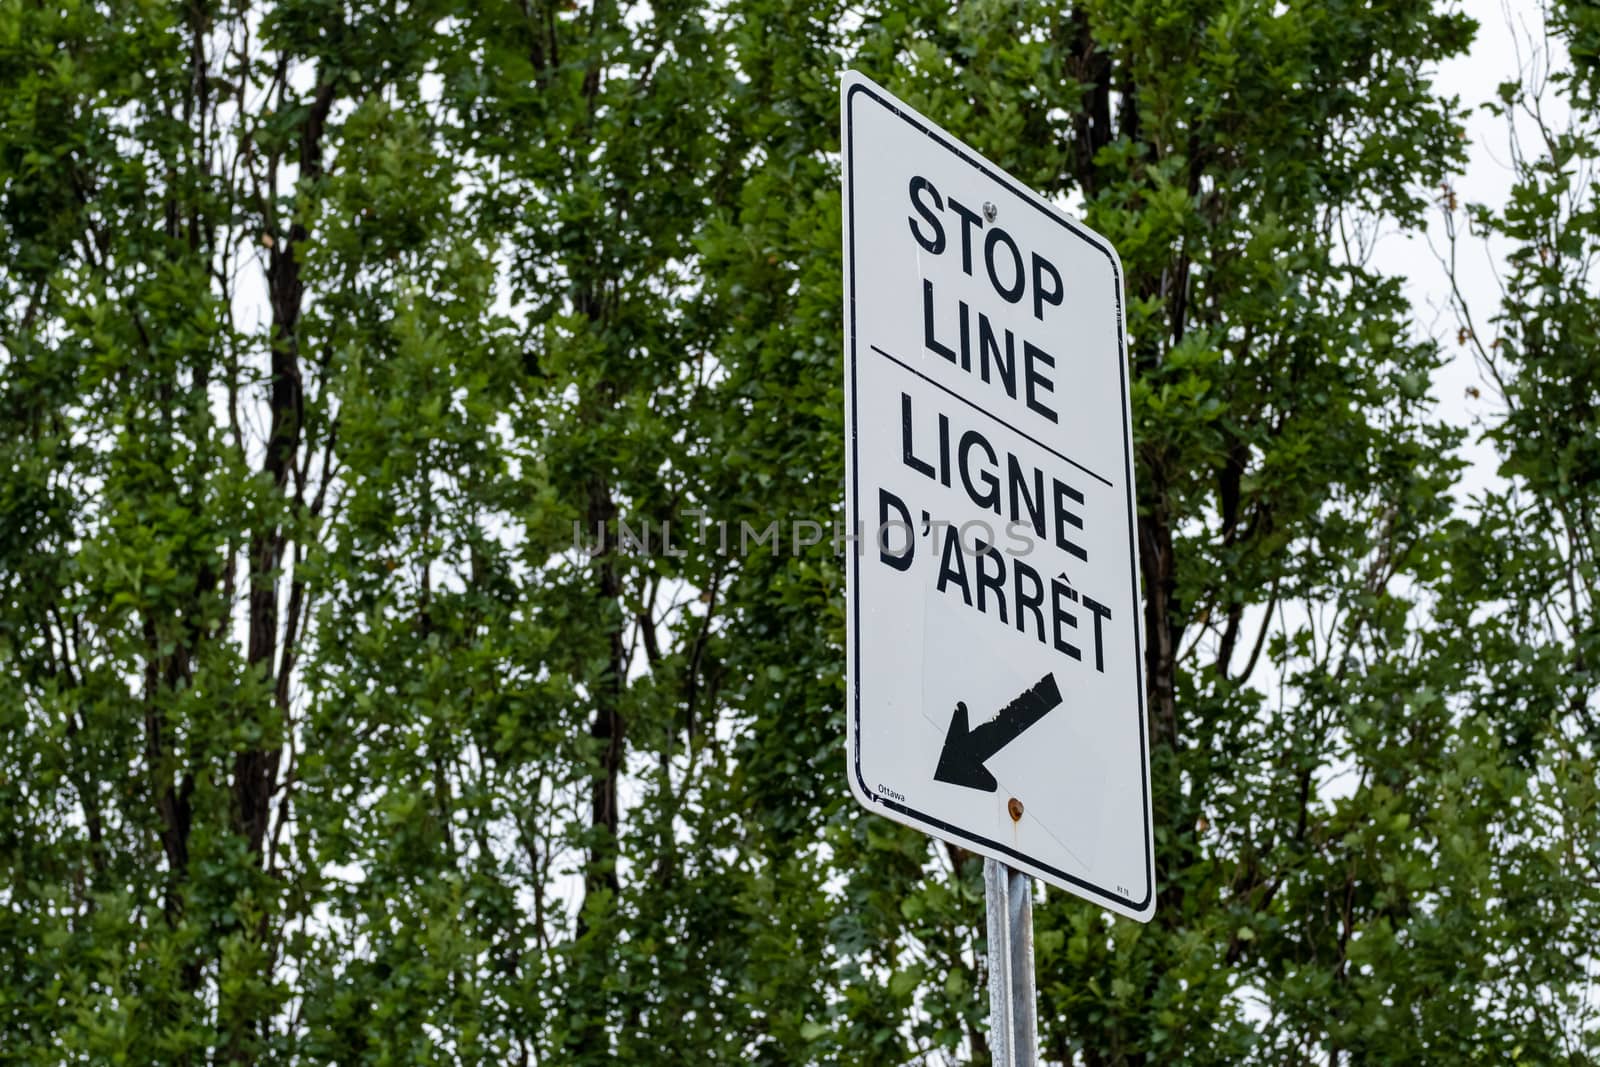 A bilingual sign indicates the location of a stop line for a traffic intersection with an arrow and labels in English and French languages.